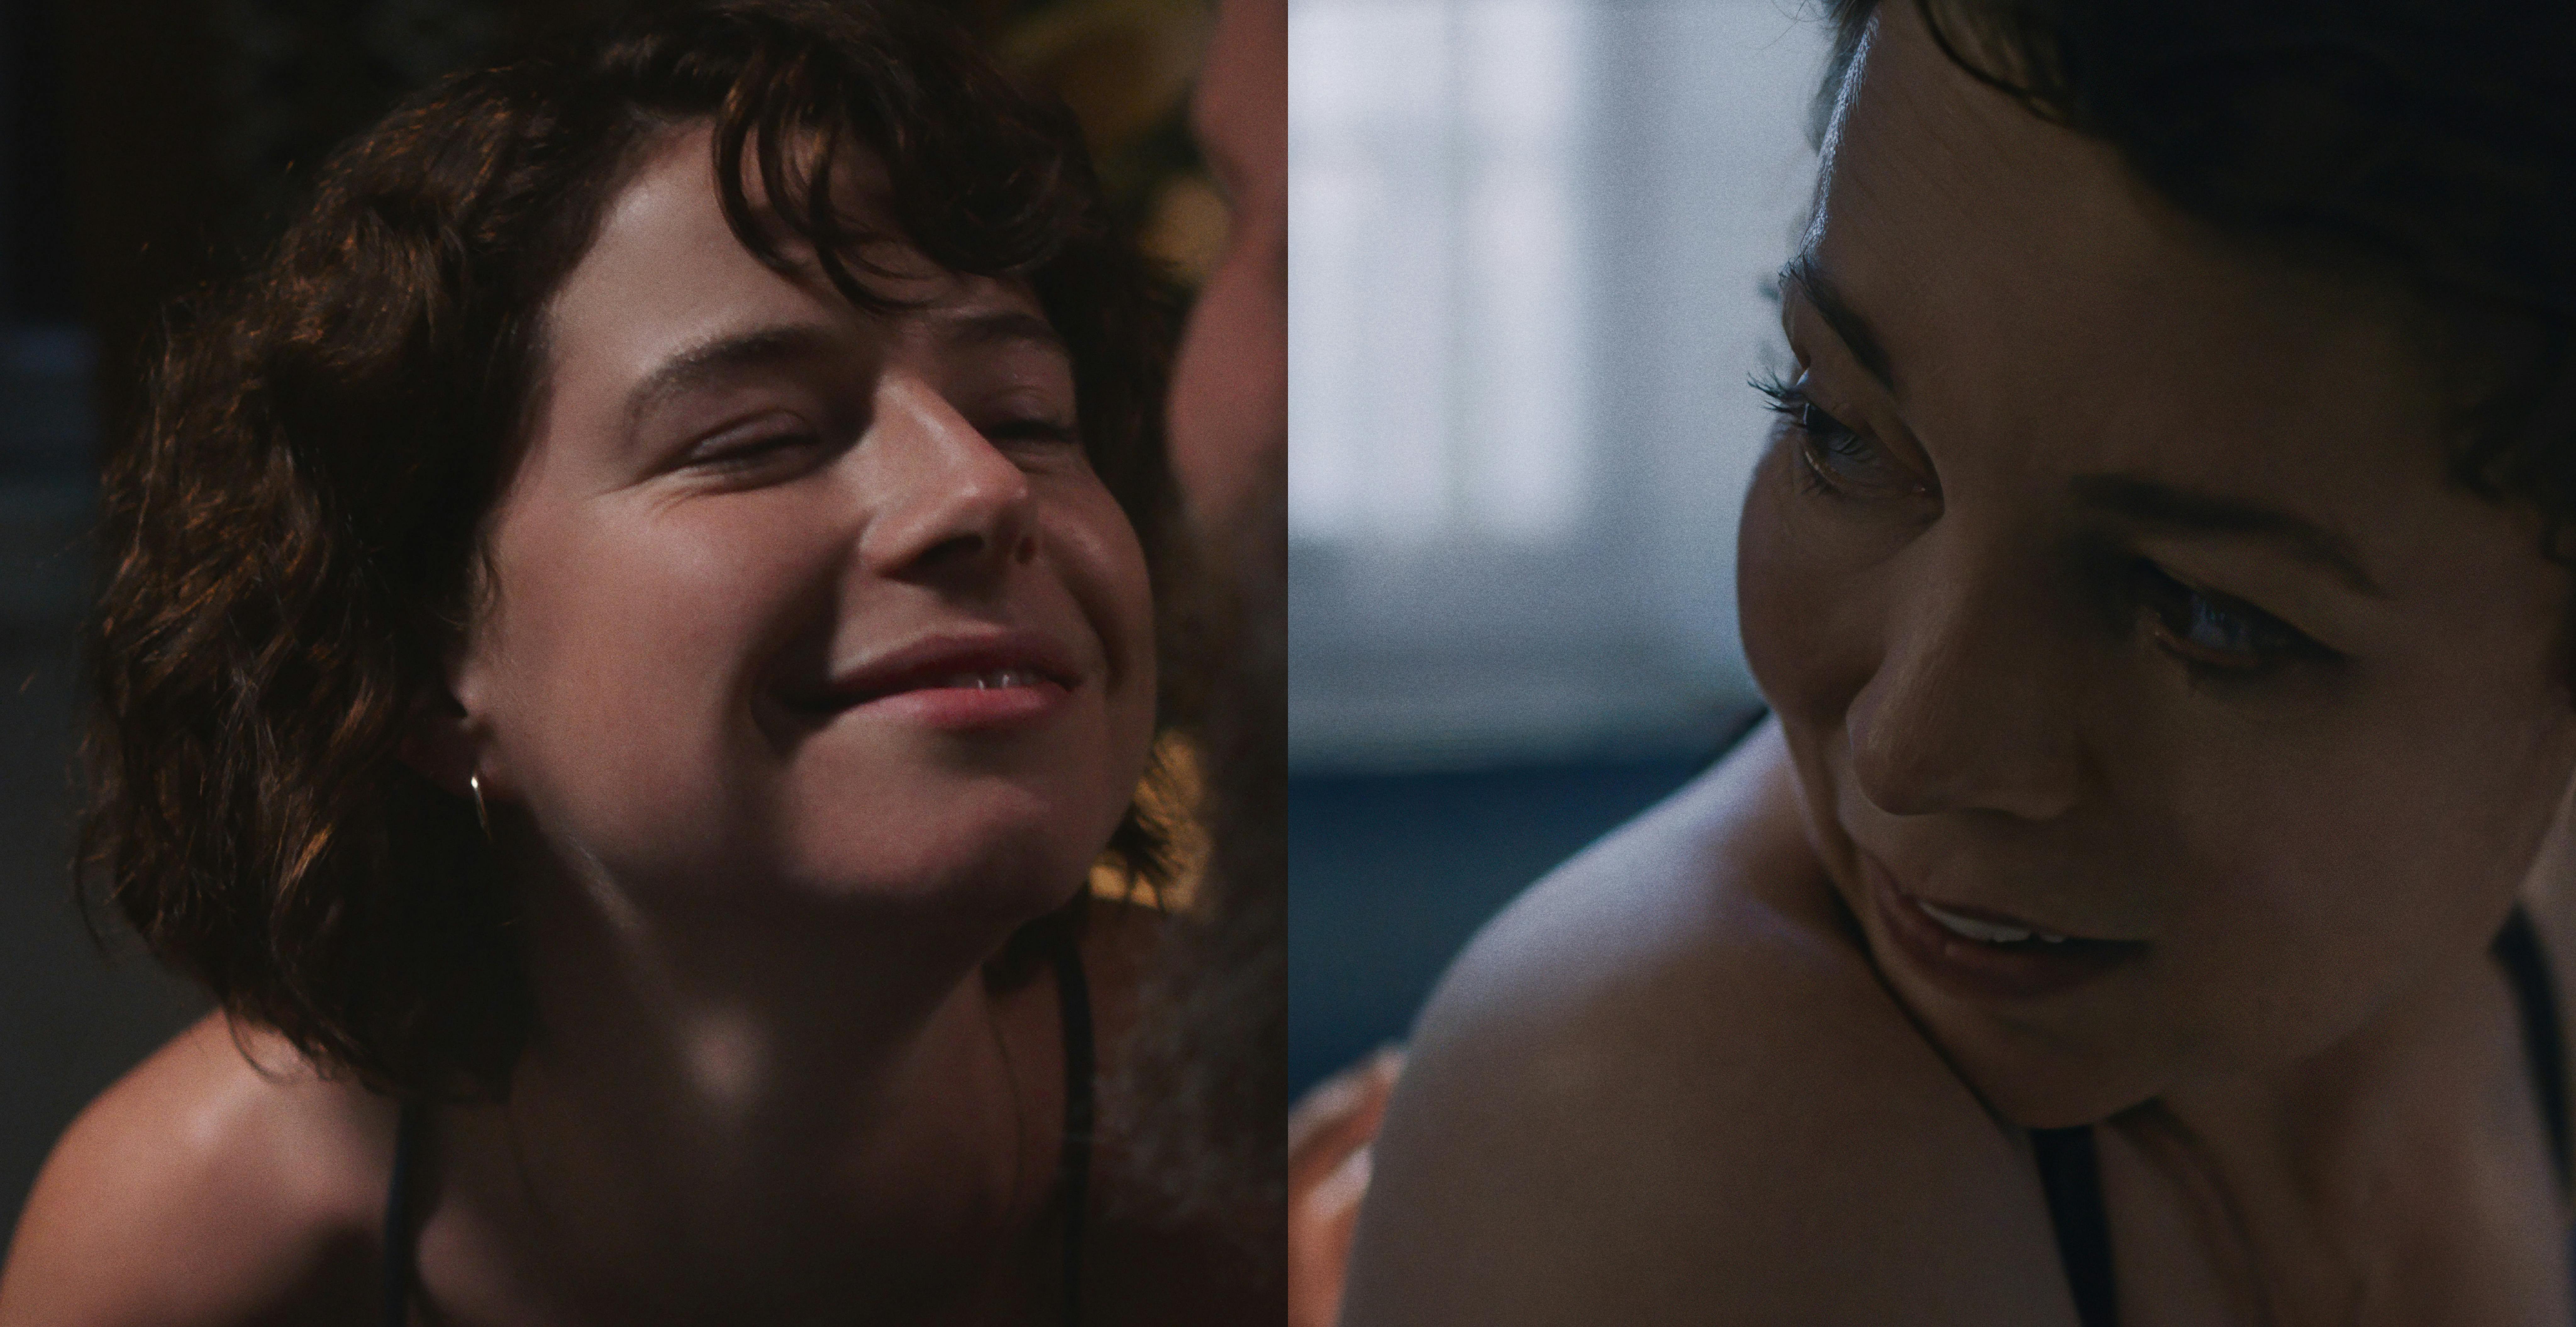 Jessie Buckley and Olivia Colman in a diptych shot. Buckley wears earrings and a tank top and smiles. Colman wears a black bathingsuit and looks over her shoulder.